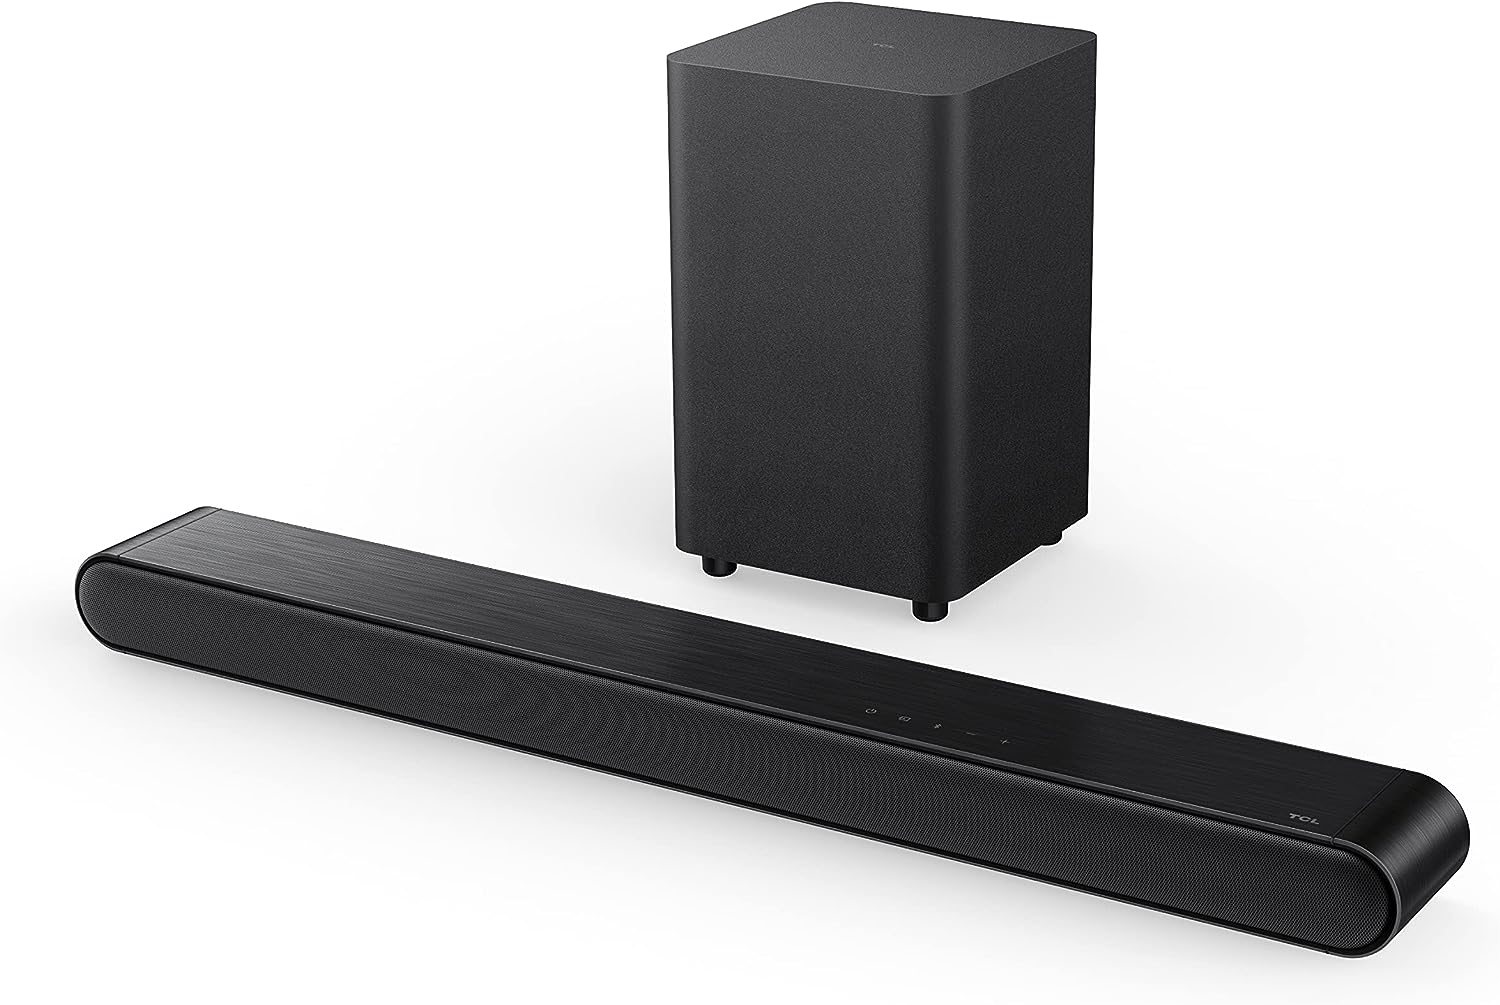 Early Black Friday Soundbar Deals - TCL 3.1ch Sound Bar with Wireless Subwoofer